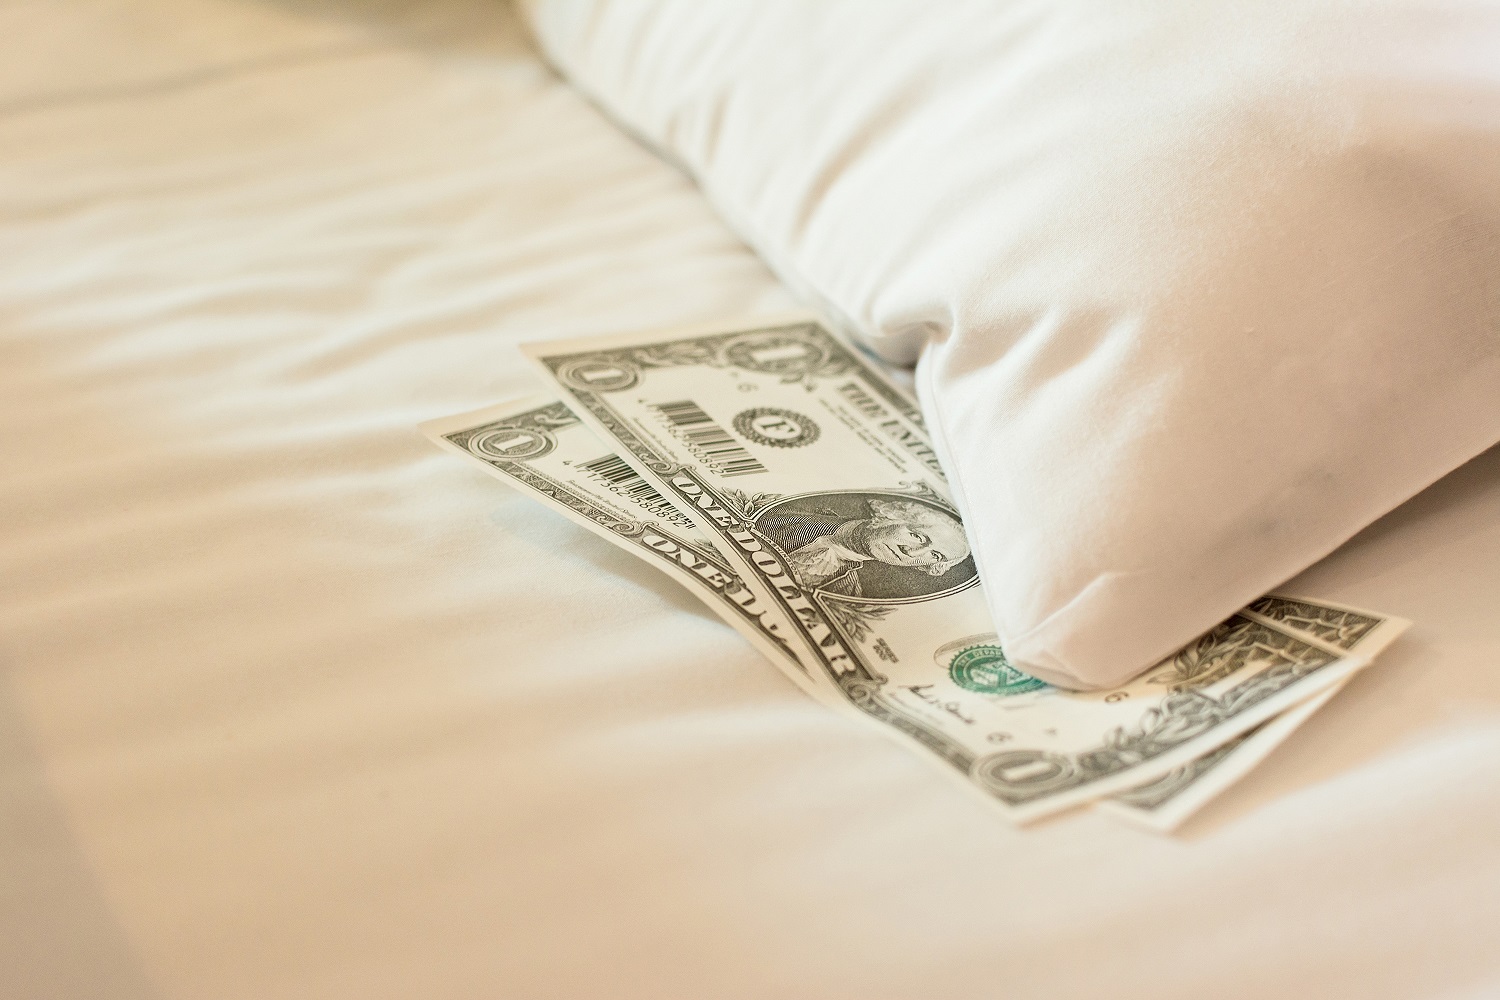 Tipping at hotels